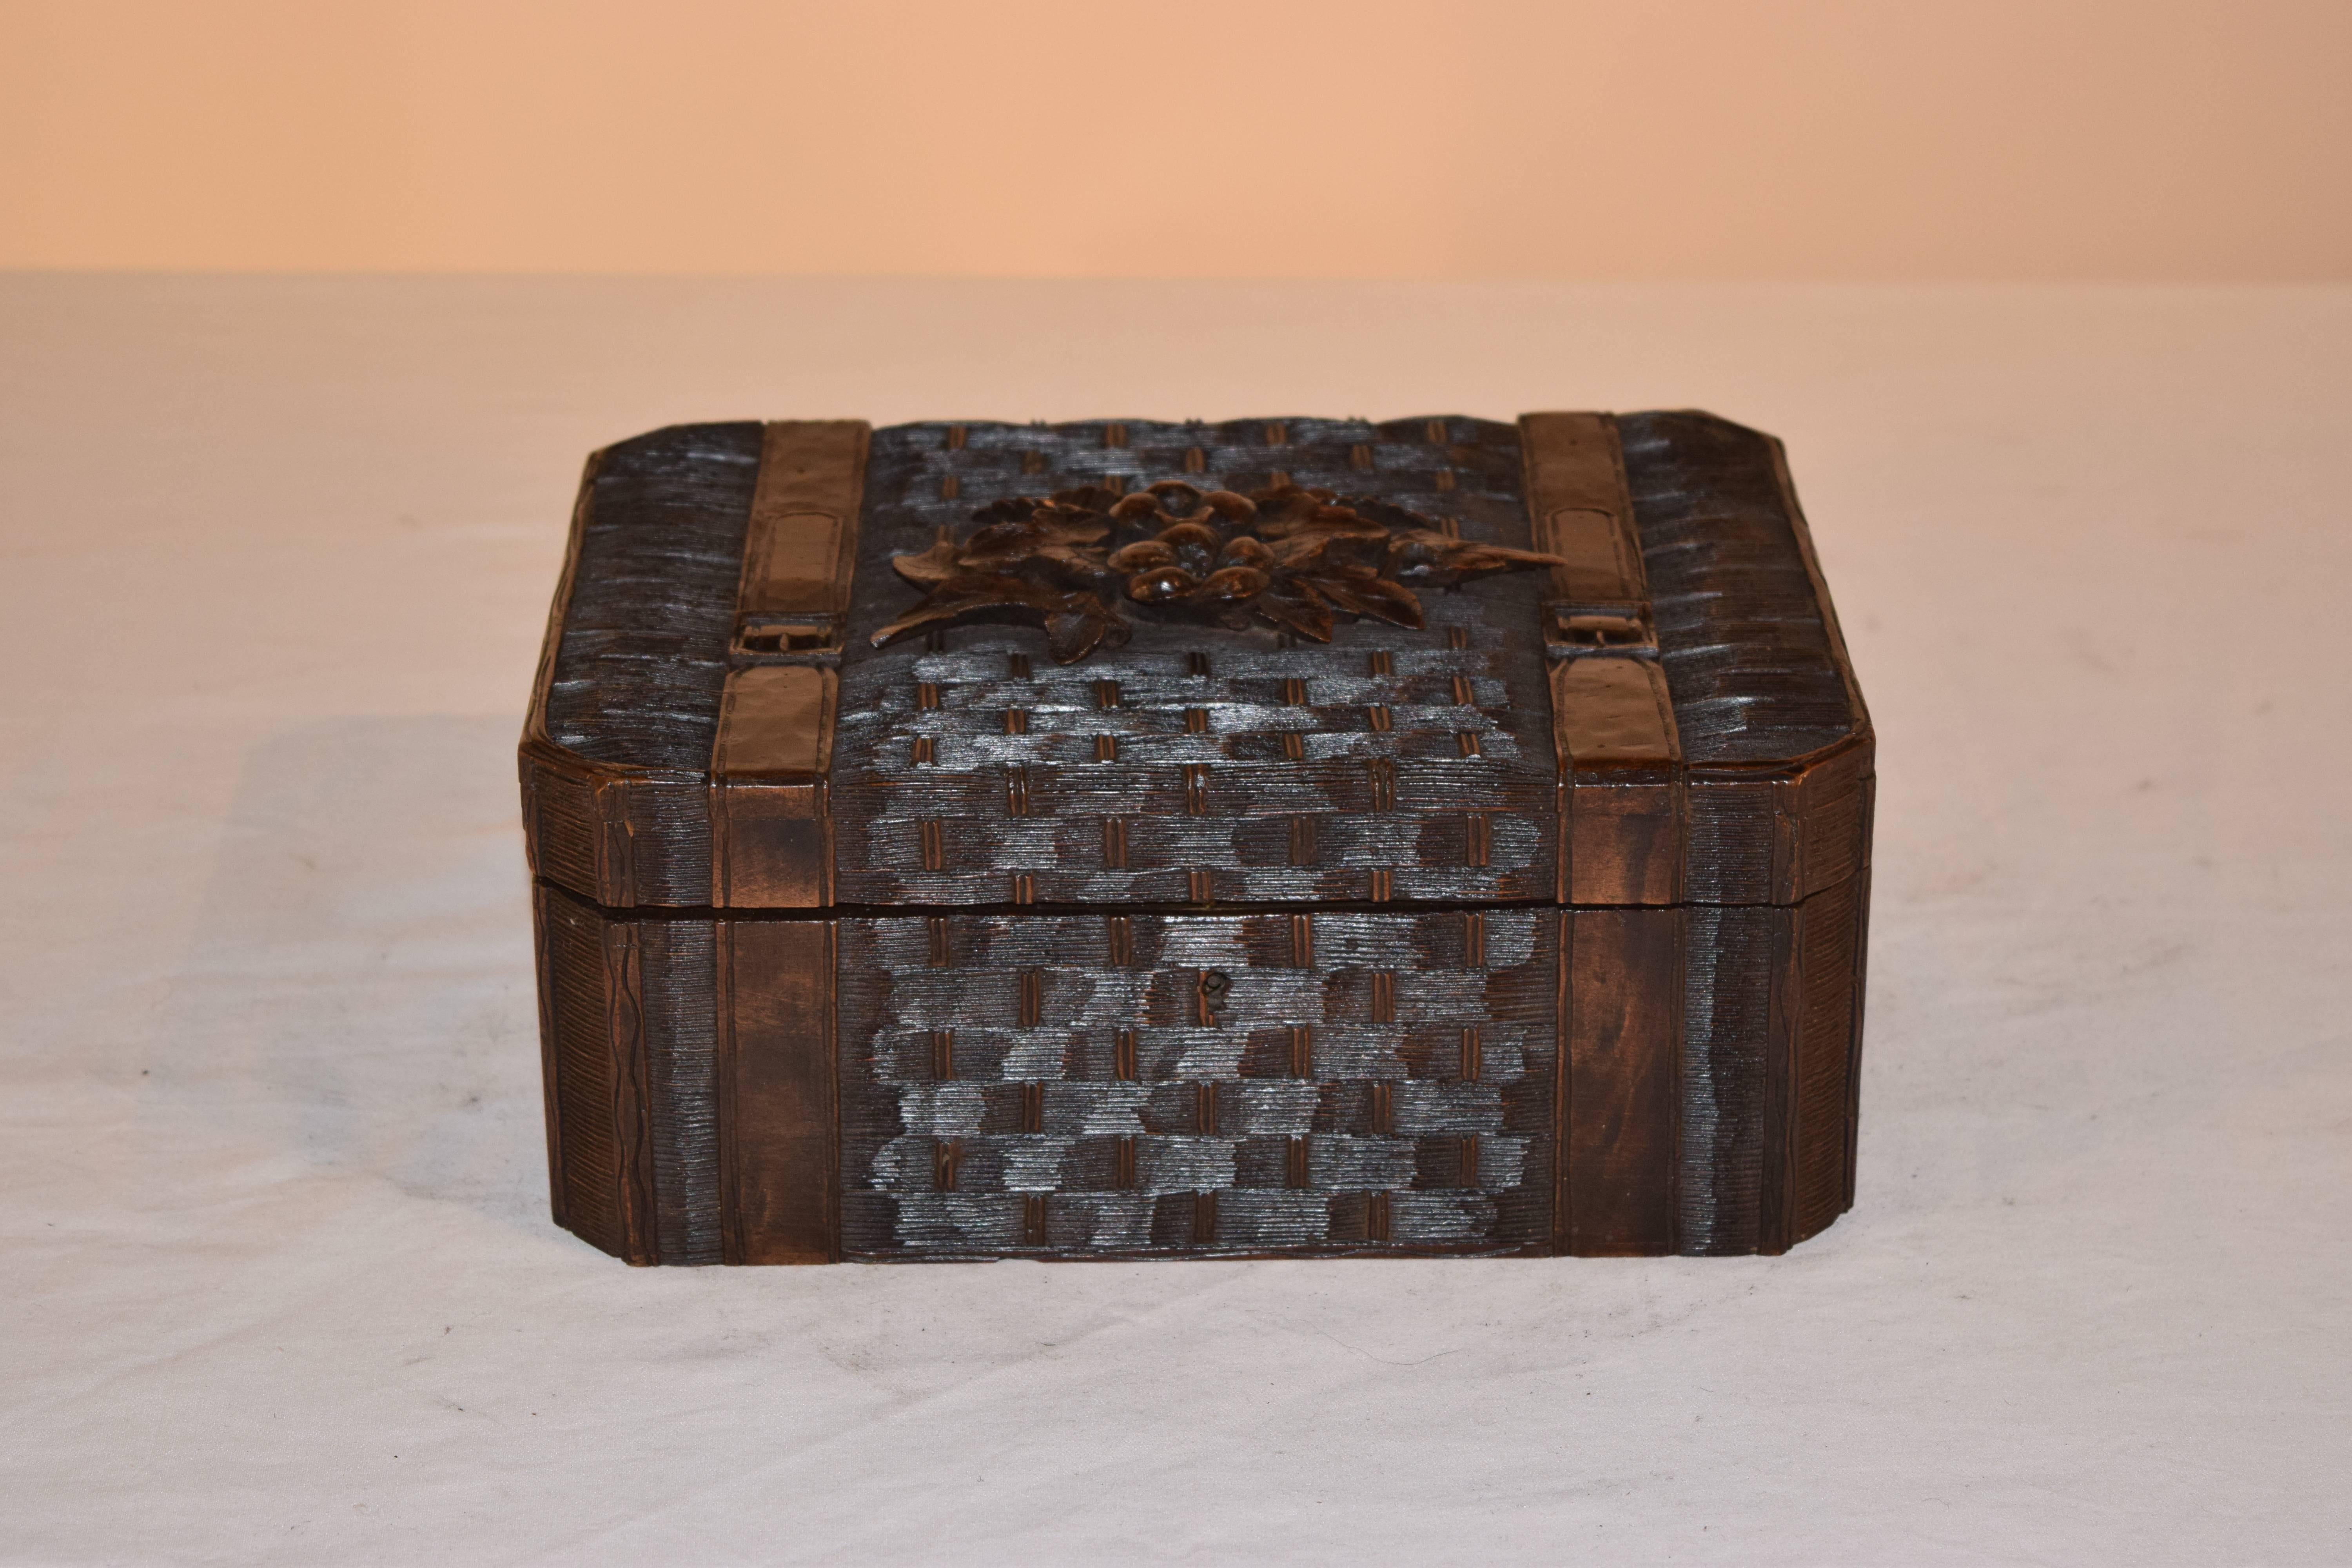 19th century dresser box carved in a basketweave pattern with luggage straps seemingly holding it closed. This is an excellent example of Black Forest carving.